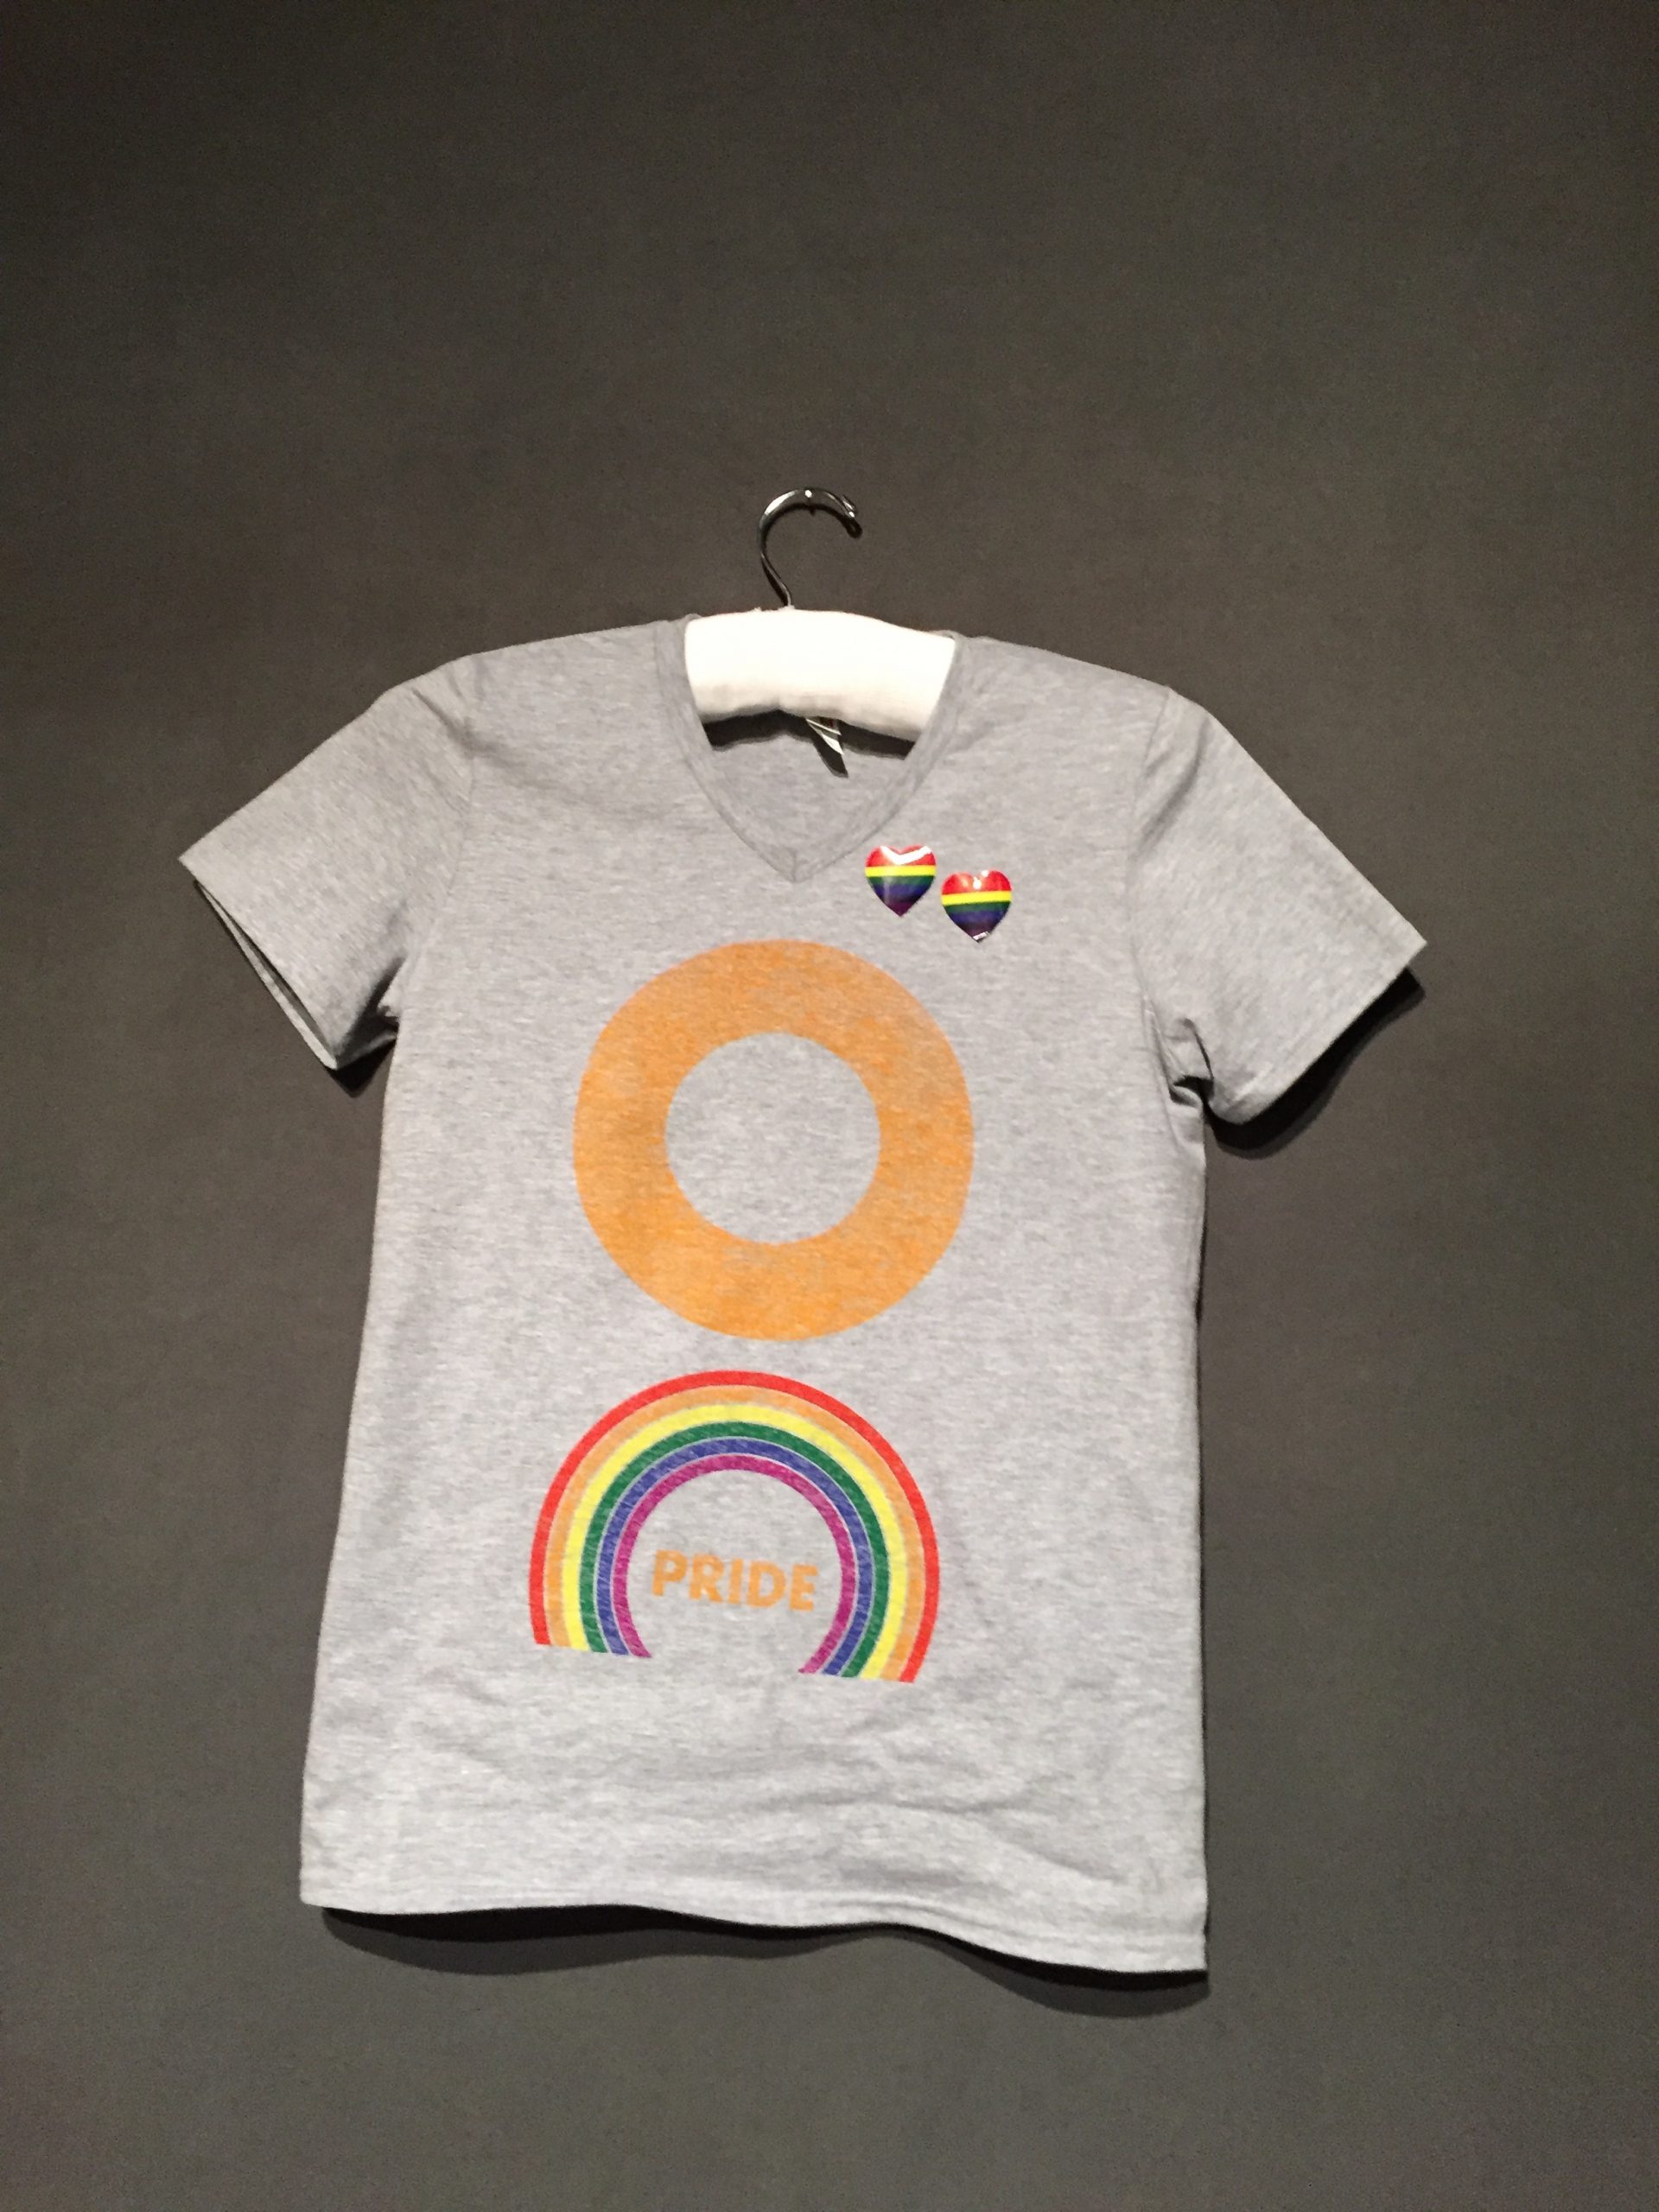 Gray short sleeve t-shirt with orange and rainbow rings